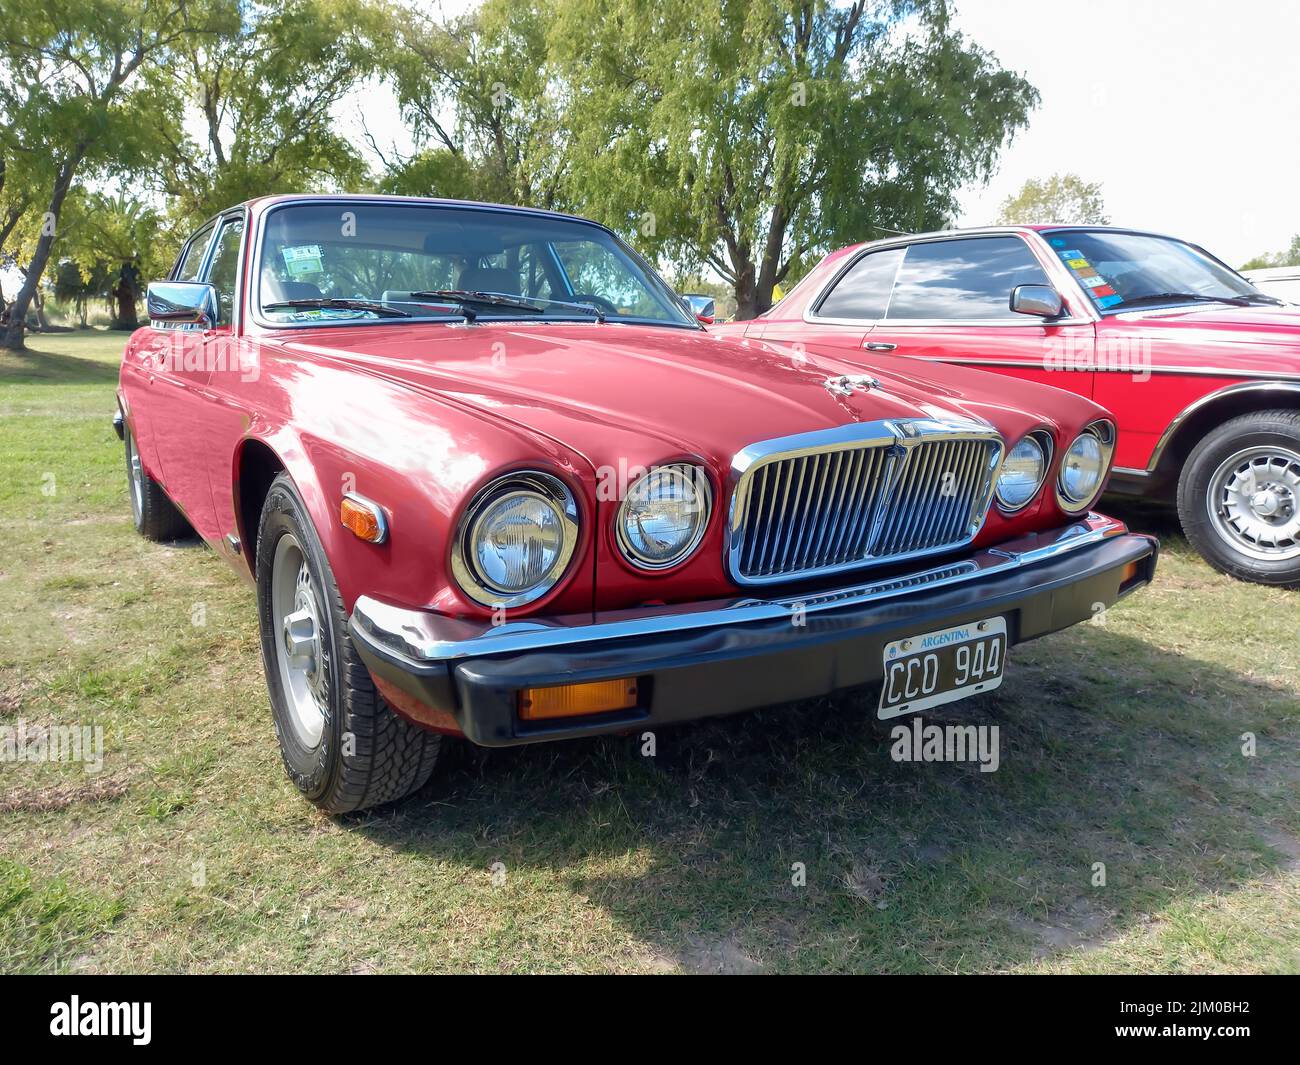 Chascomus, Argentina - Apr 9, 2022: Red maroon Jaguar XJ6 Series 3 four door saloon 1979 - 1992 parked on the grass. Nature trees in the background. C Stock Photo